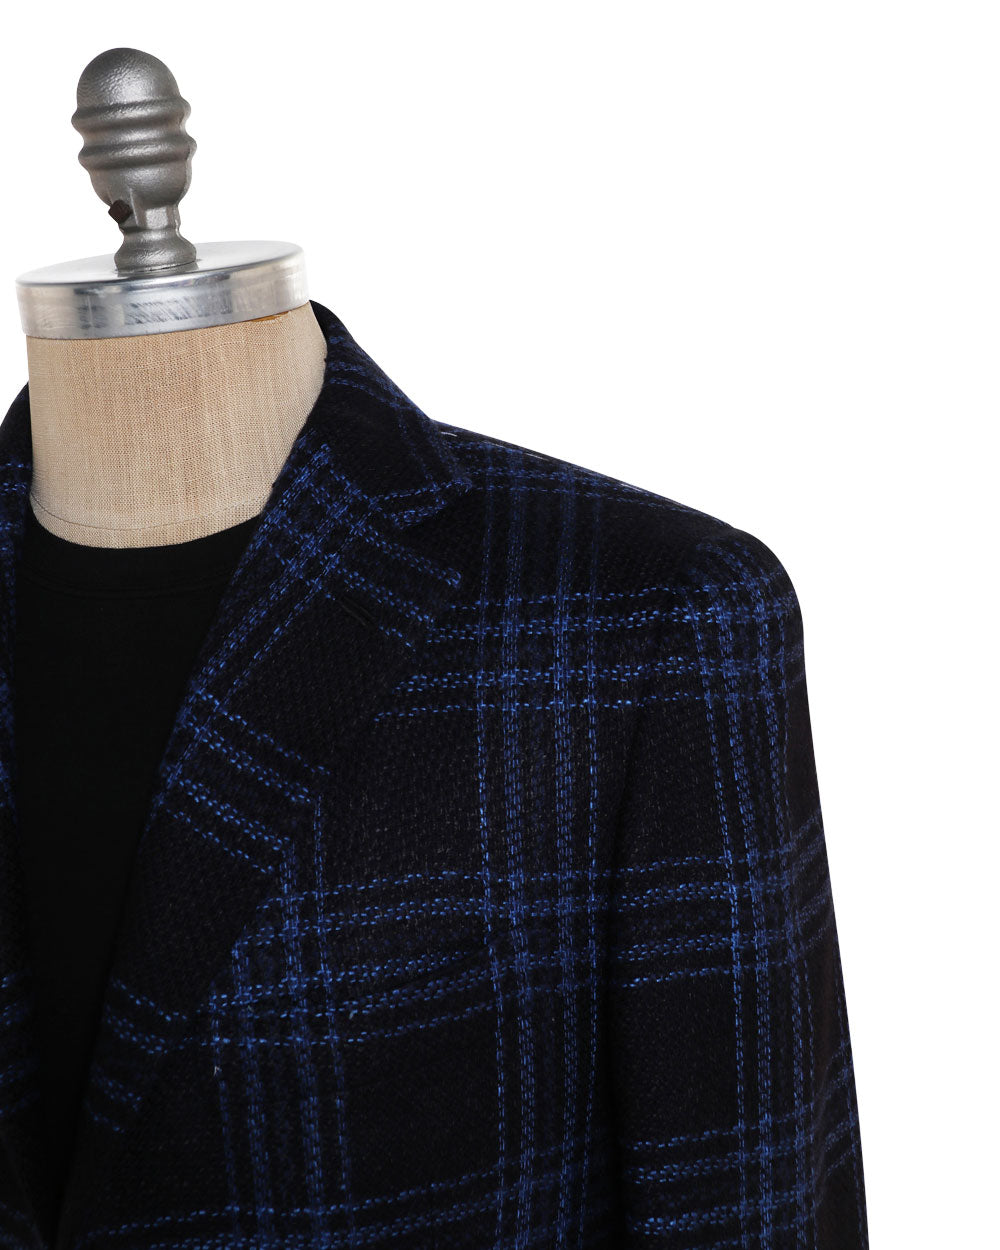 Dark Navy and Electric Blue Cashmere Blend Plaid Sportcoat